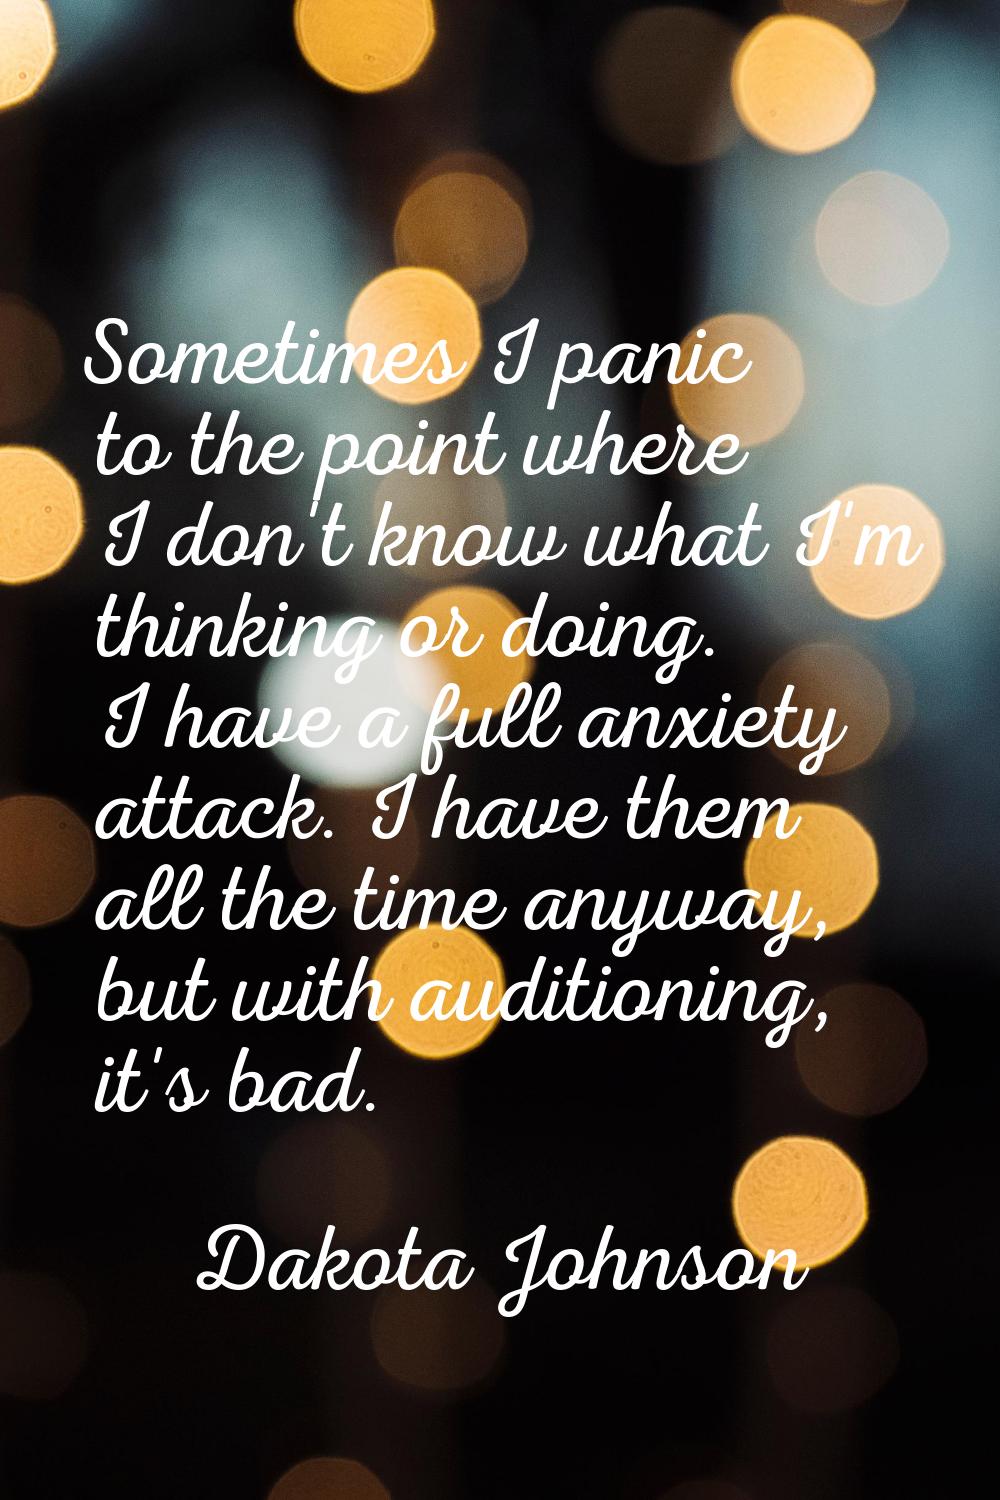 Sometimes I panic to the point where I don't know what I'm thinking or doing. I have a full anxiety